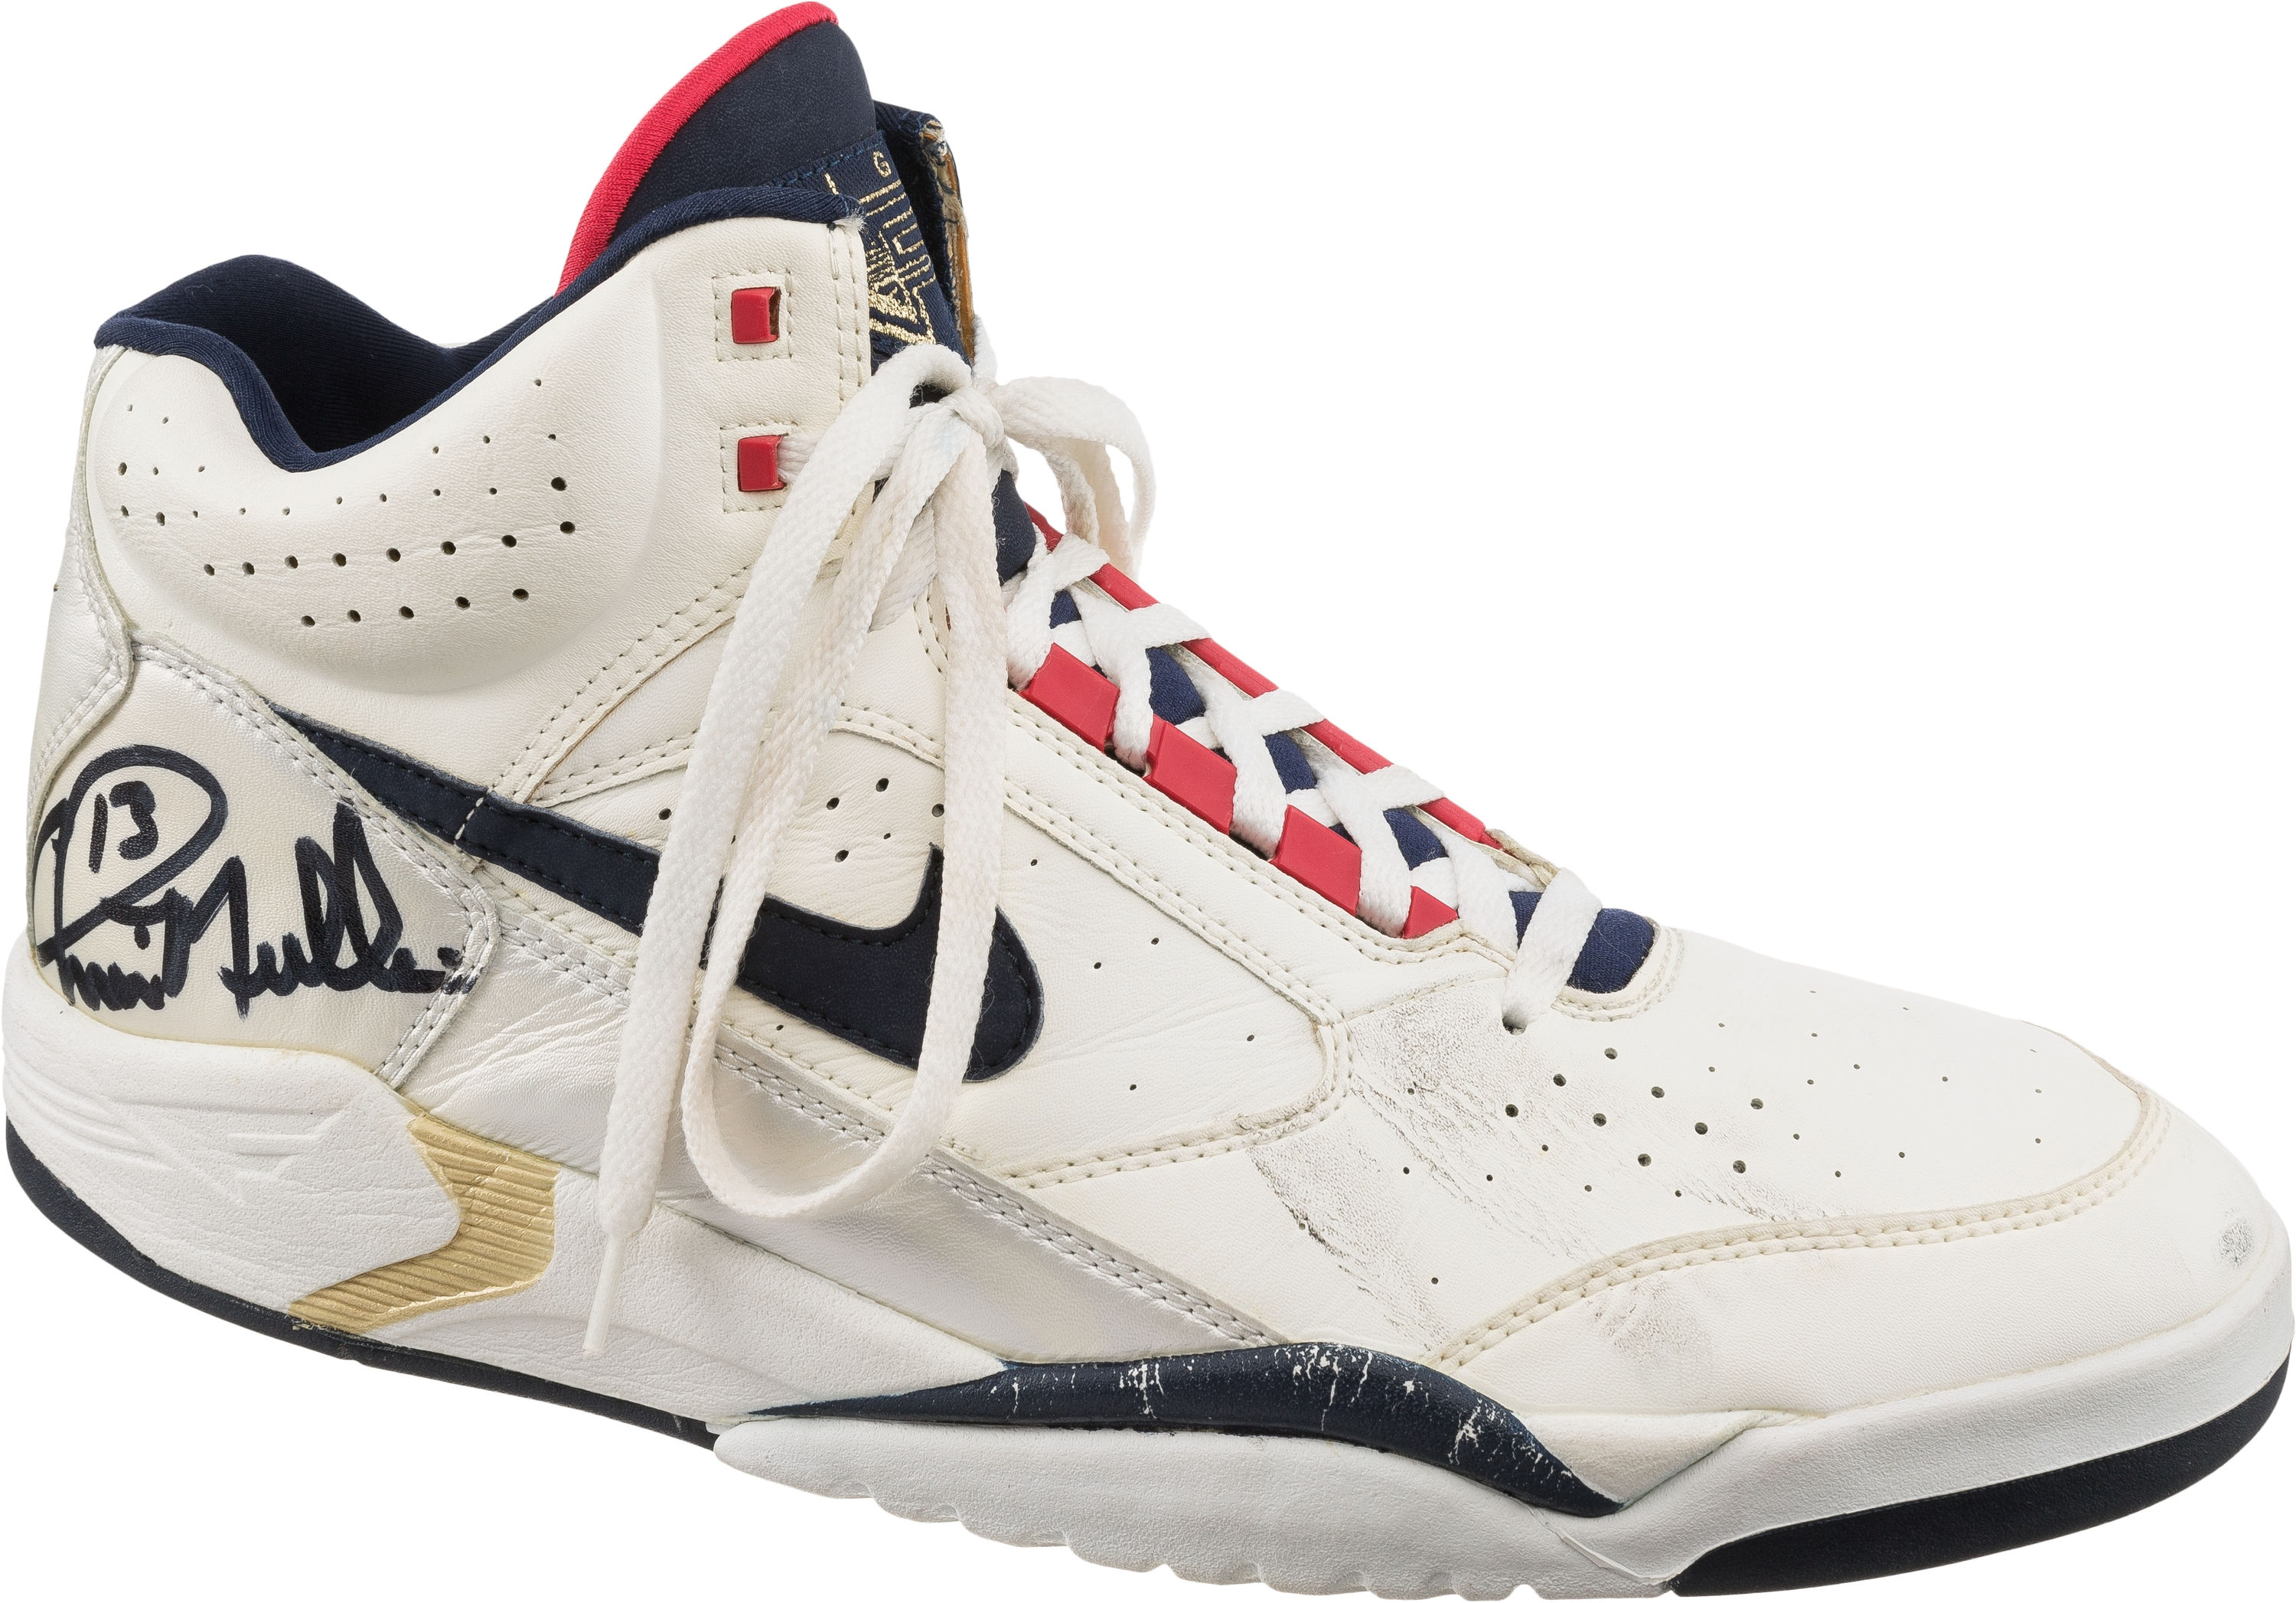 Michael Jordan's Signed 1992 'Dream Team' Sneakers Are Up for